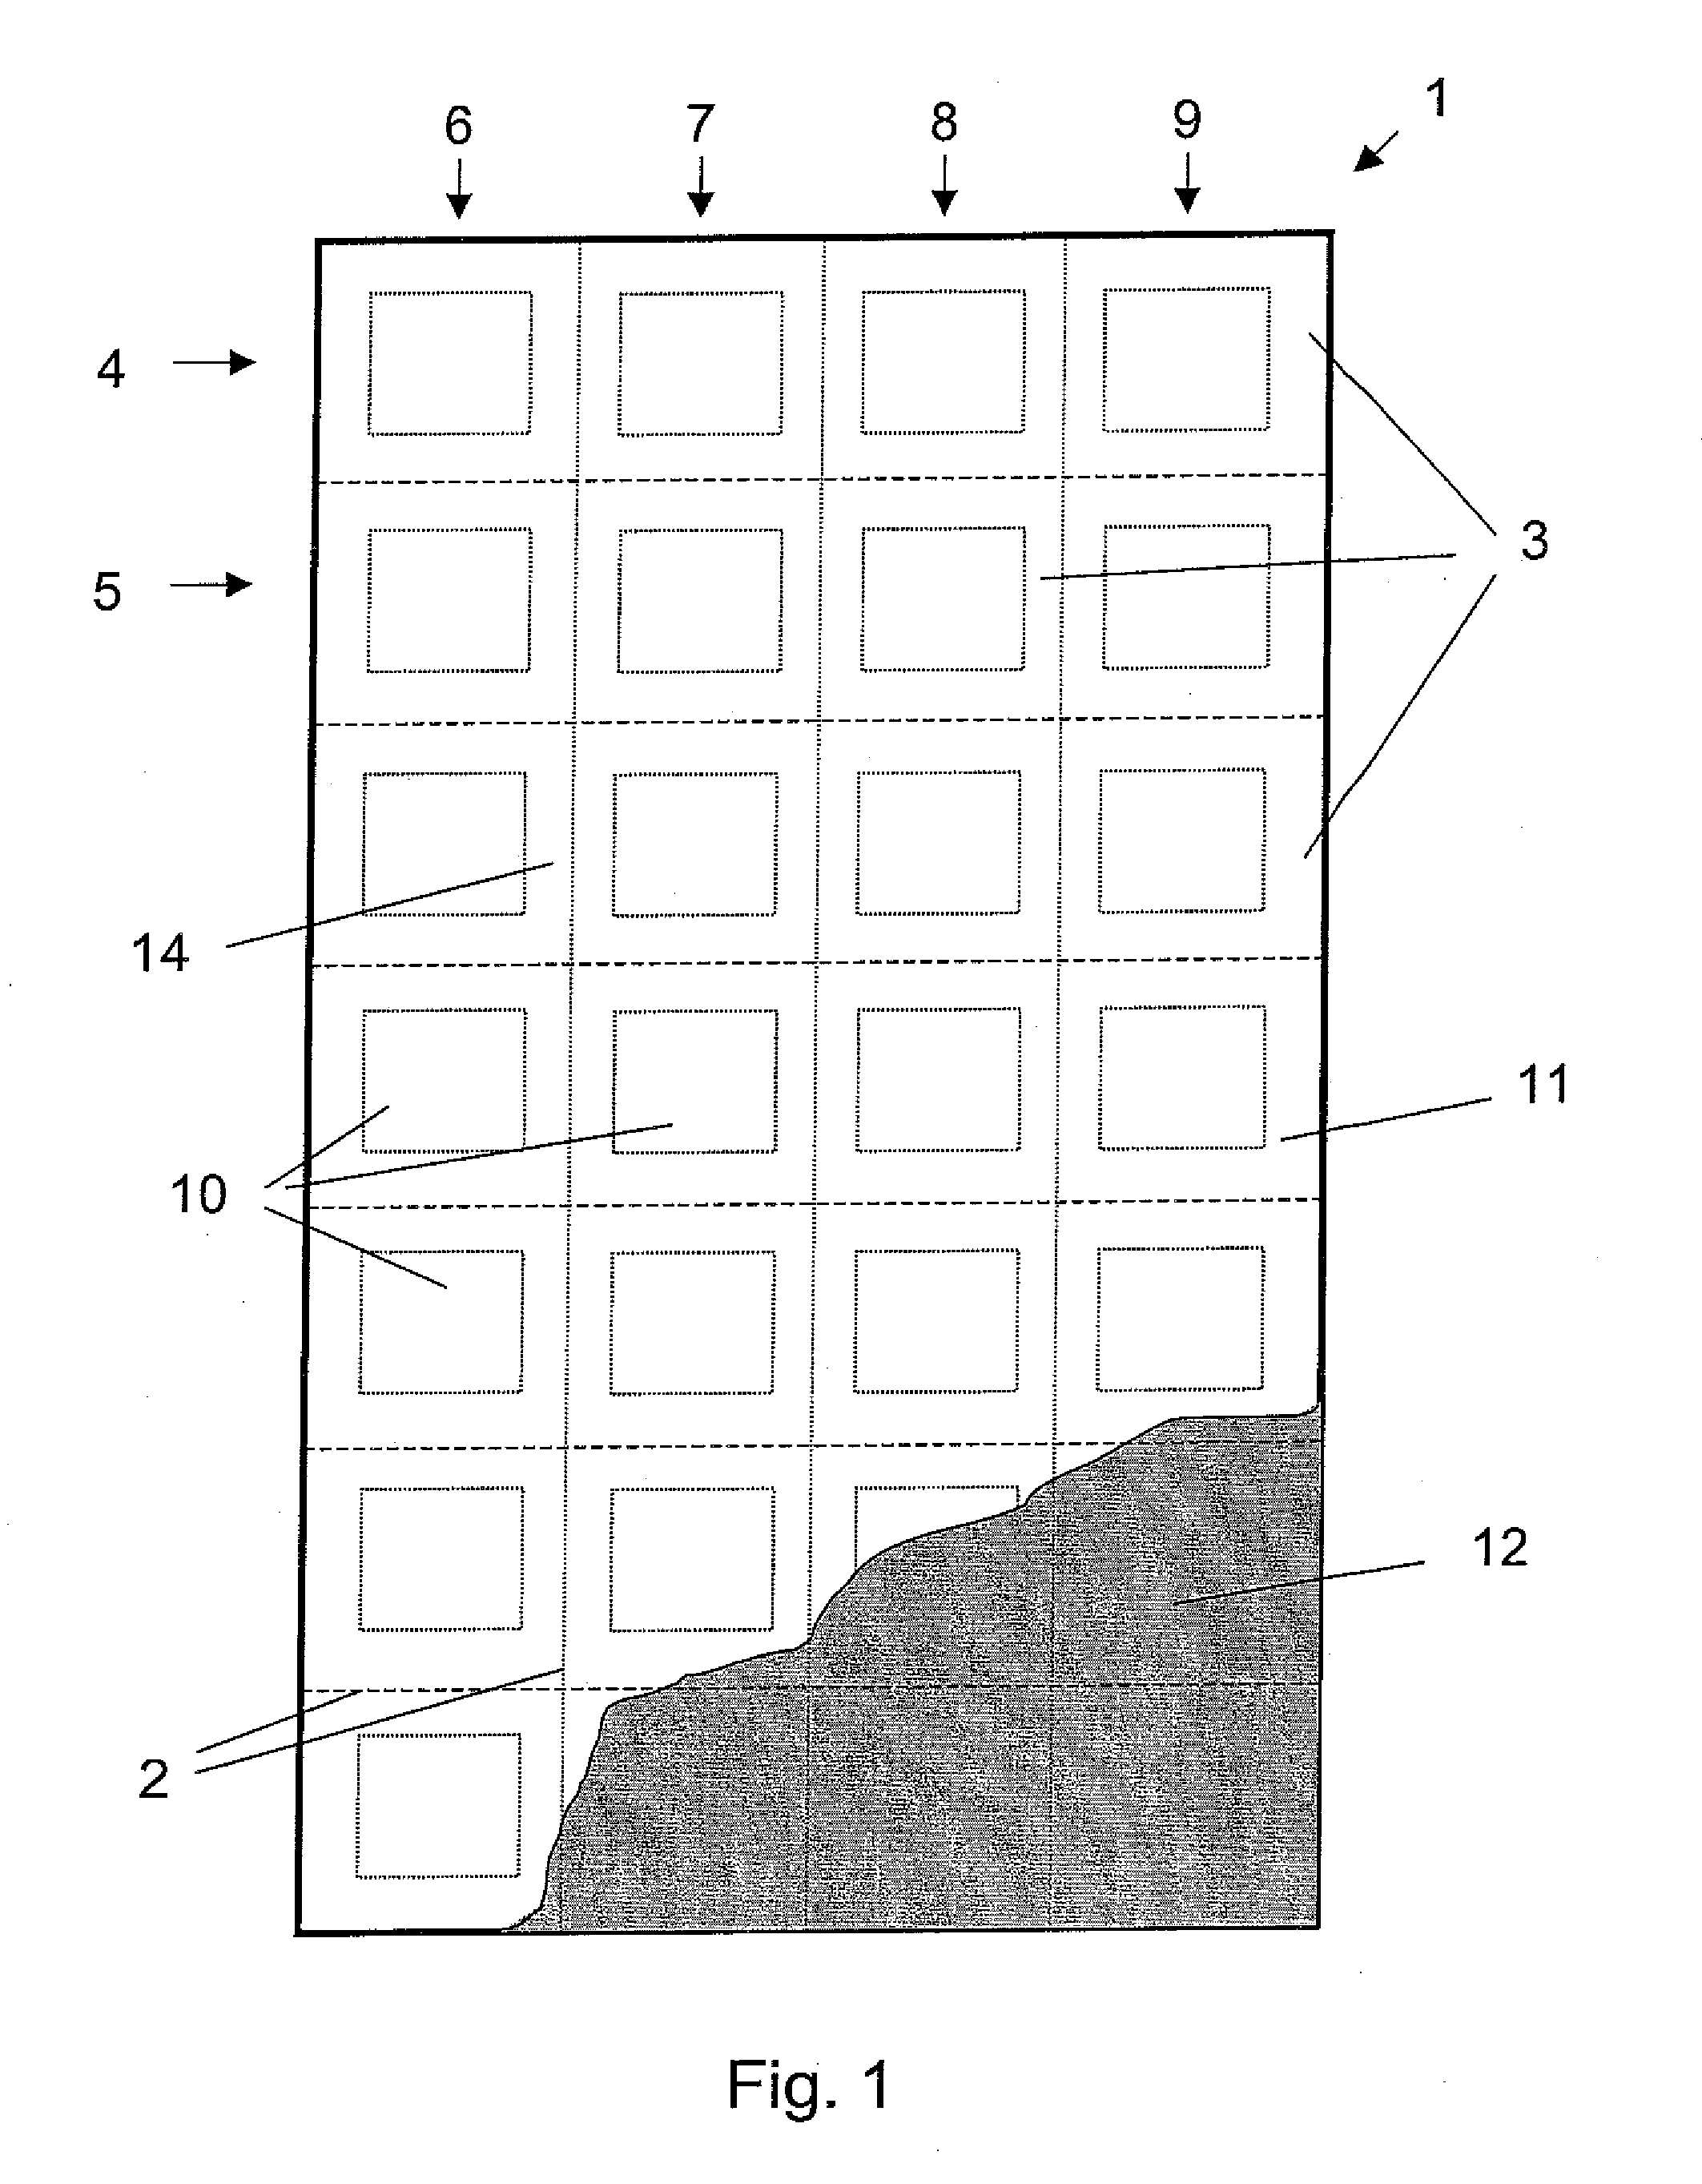 Method of Manufacturing Packaging Comprising Pharmaceutical Products